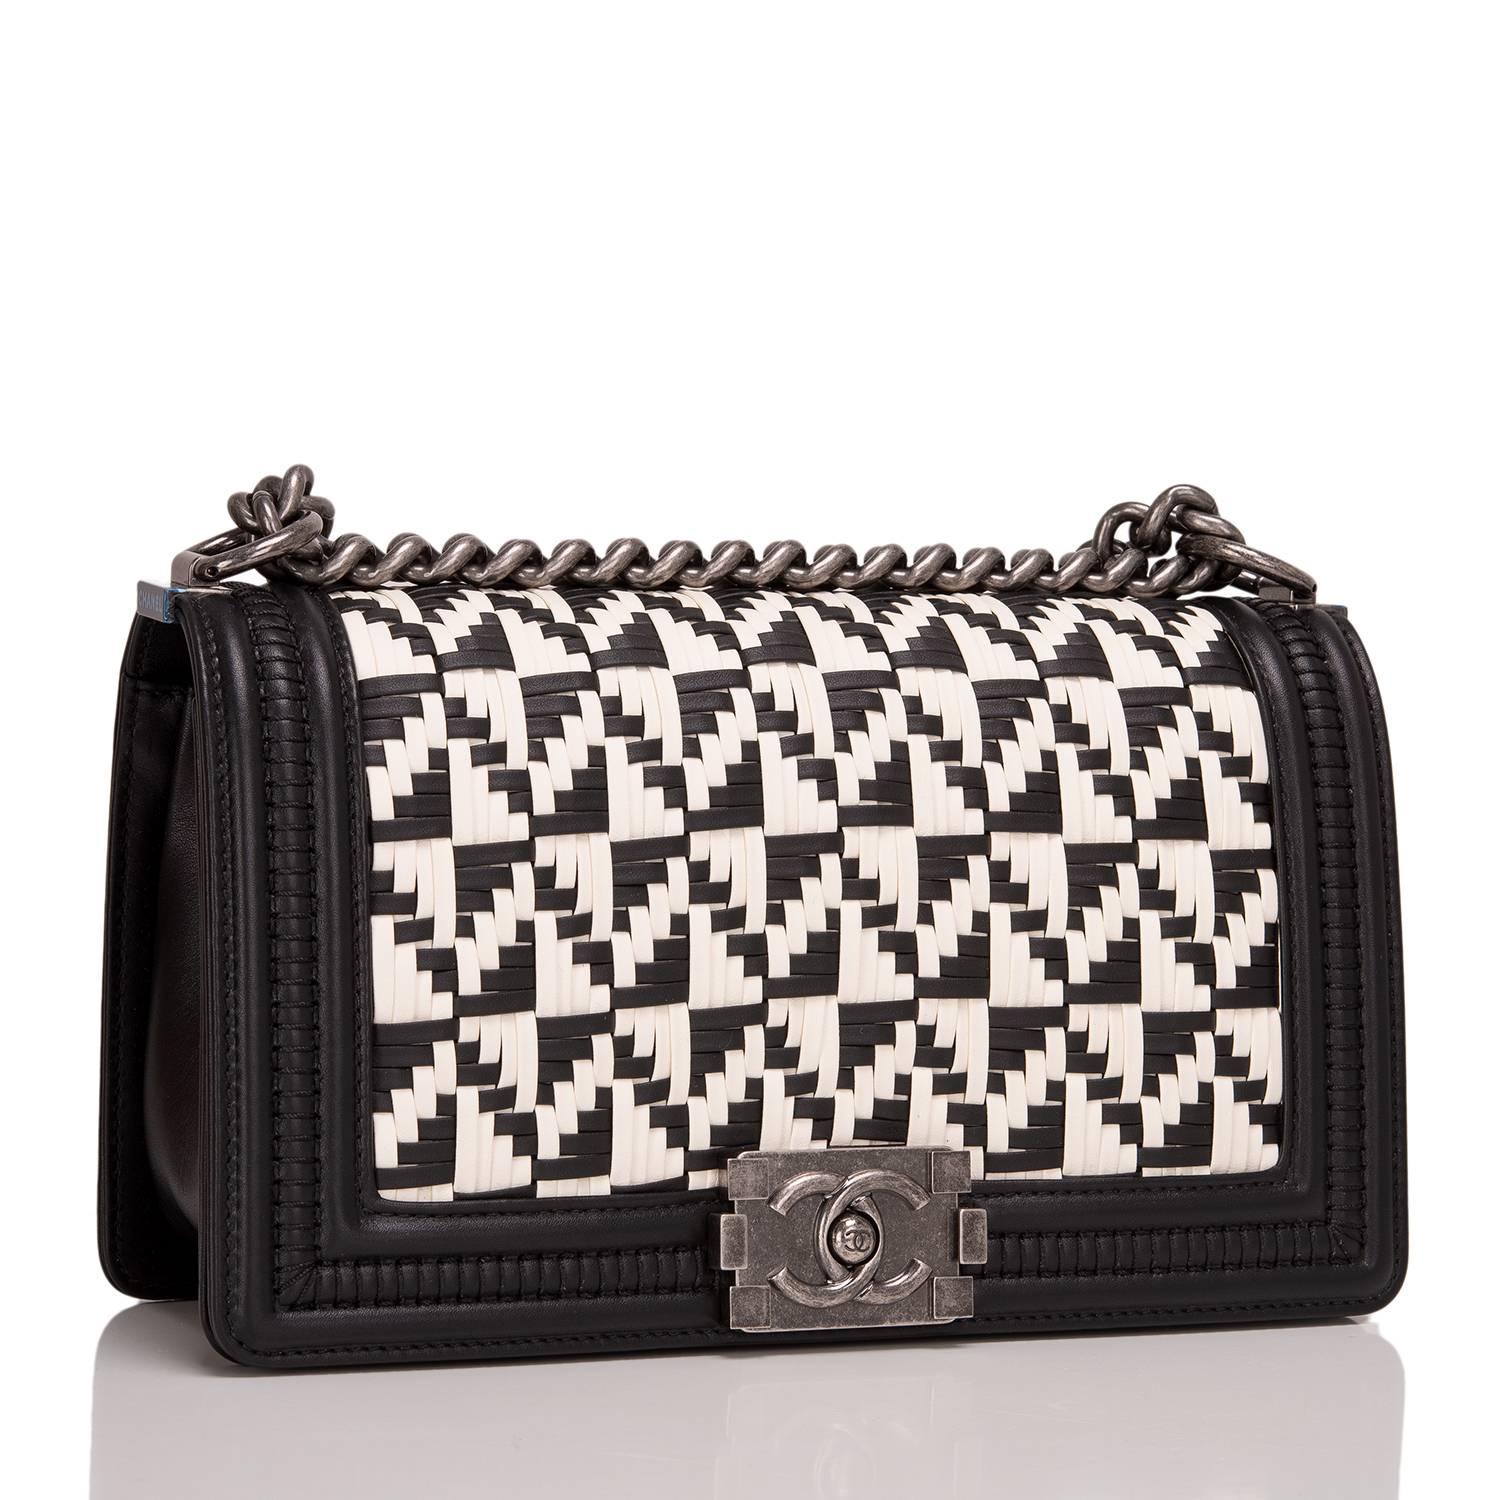 Chanel limited edition Medium Boy bag of calfskin leather accented with aged ruthenium hardware.

The bag features a black and white interwoven braided pattern (reminiscent of a French brasserie's floor), black leather trim, sides and bottom, full